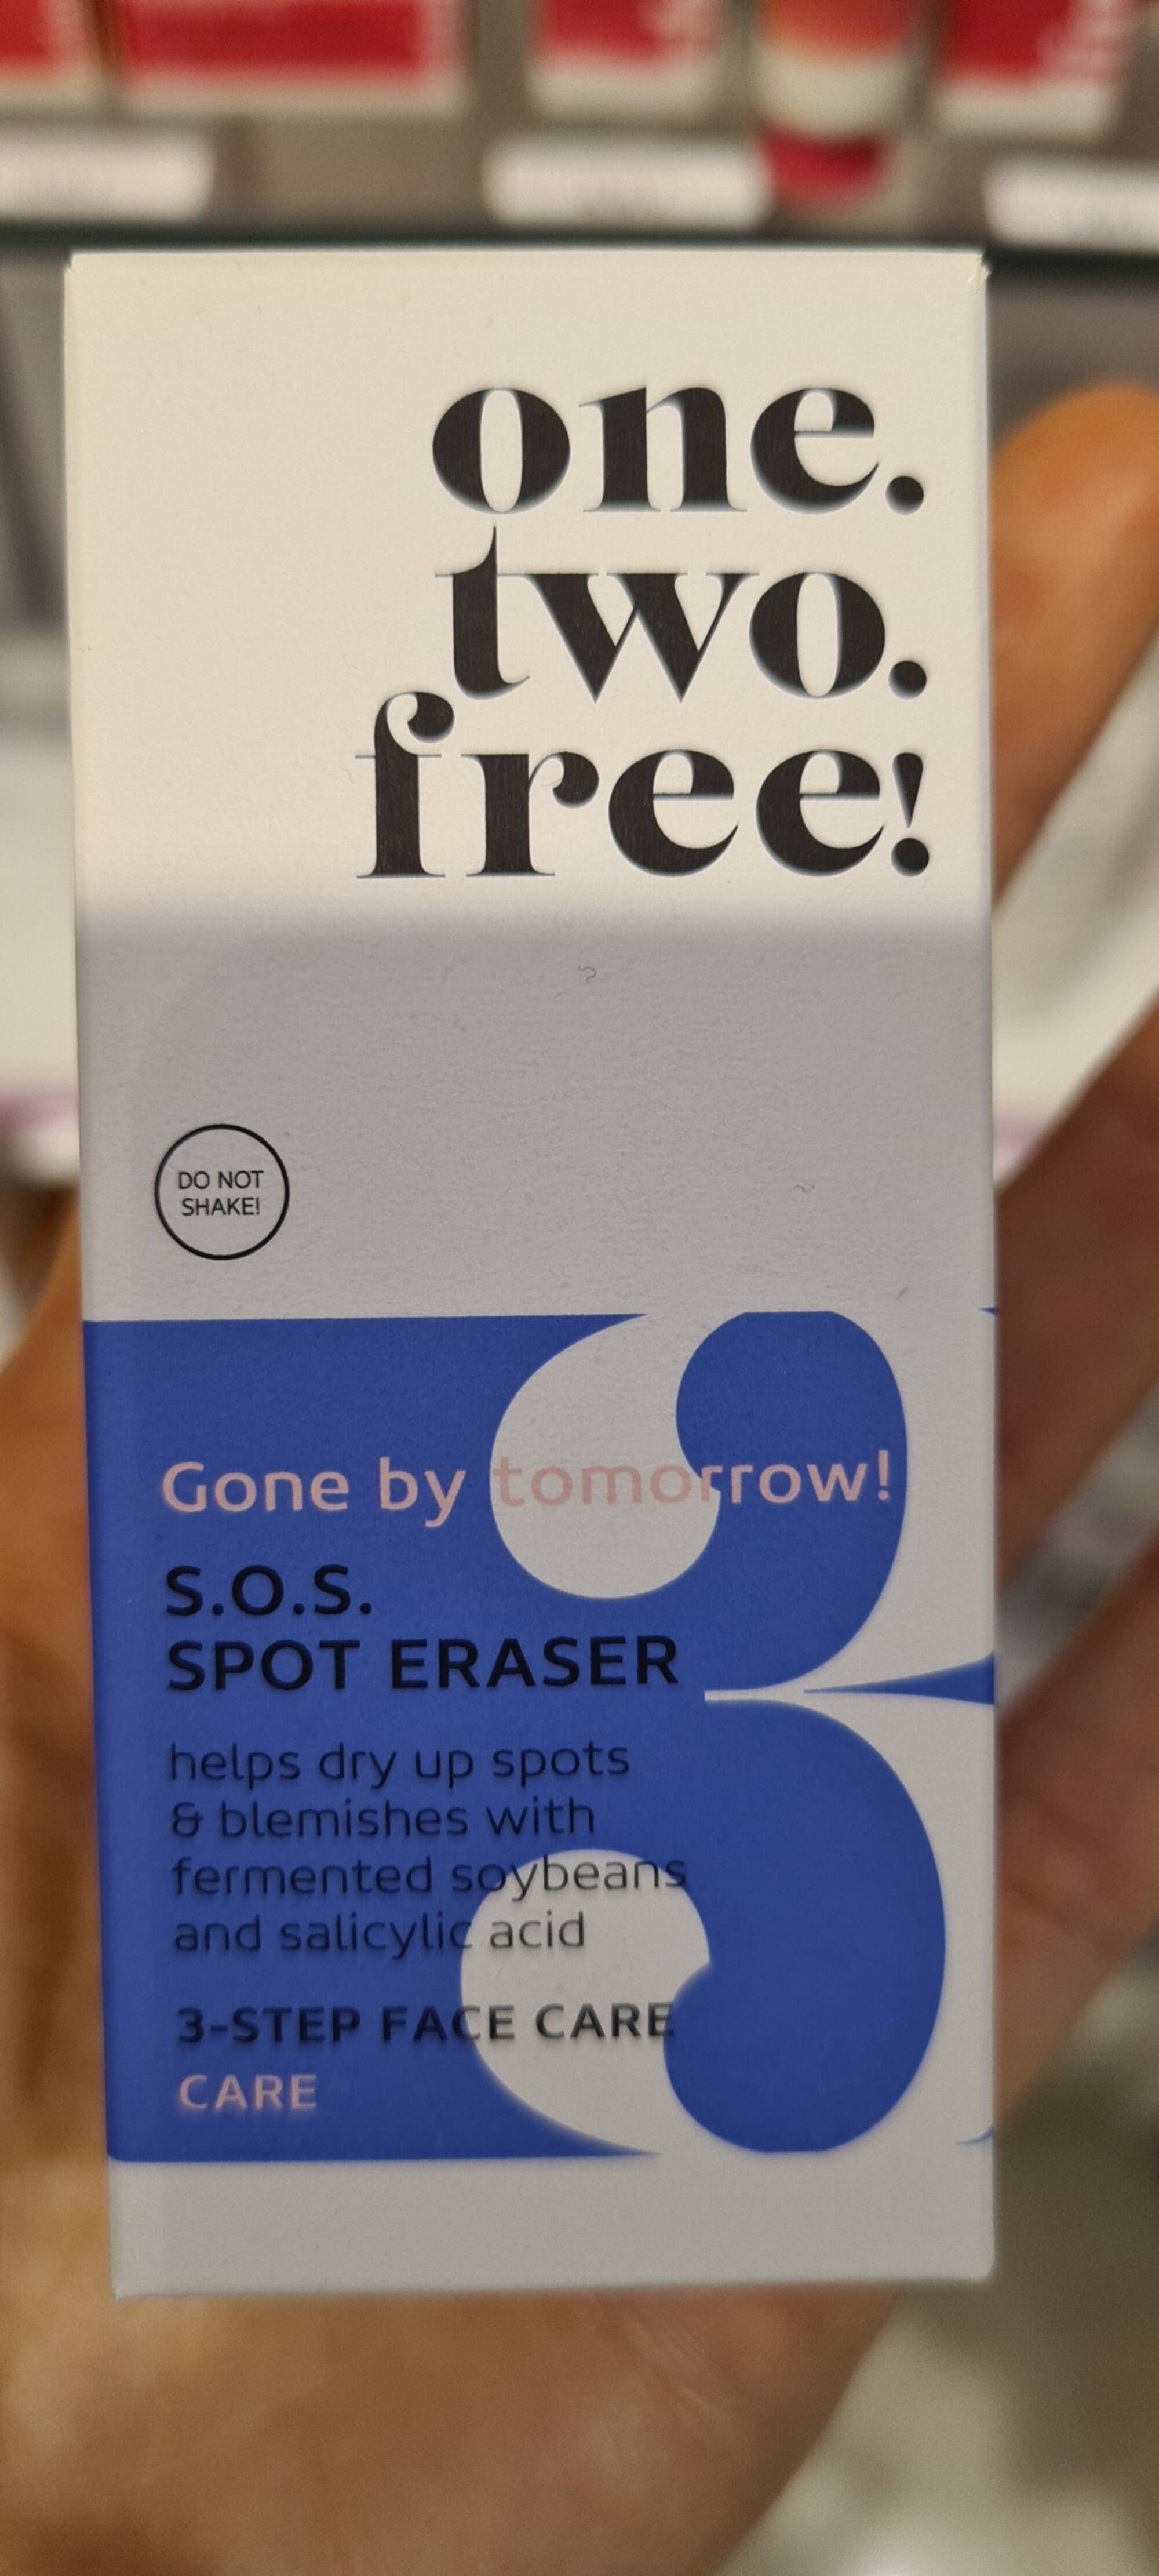 ONE.TWO.FREE! - S.O.S Spot eraser - 3-step face care